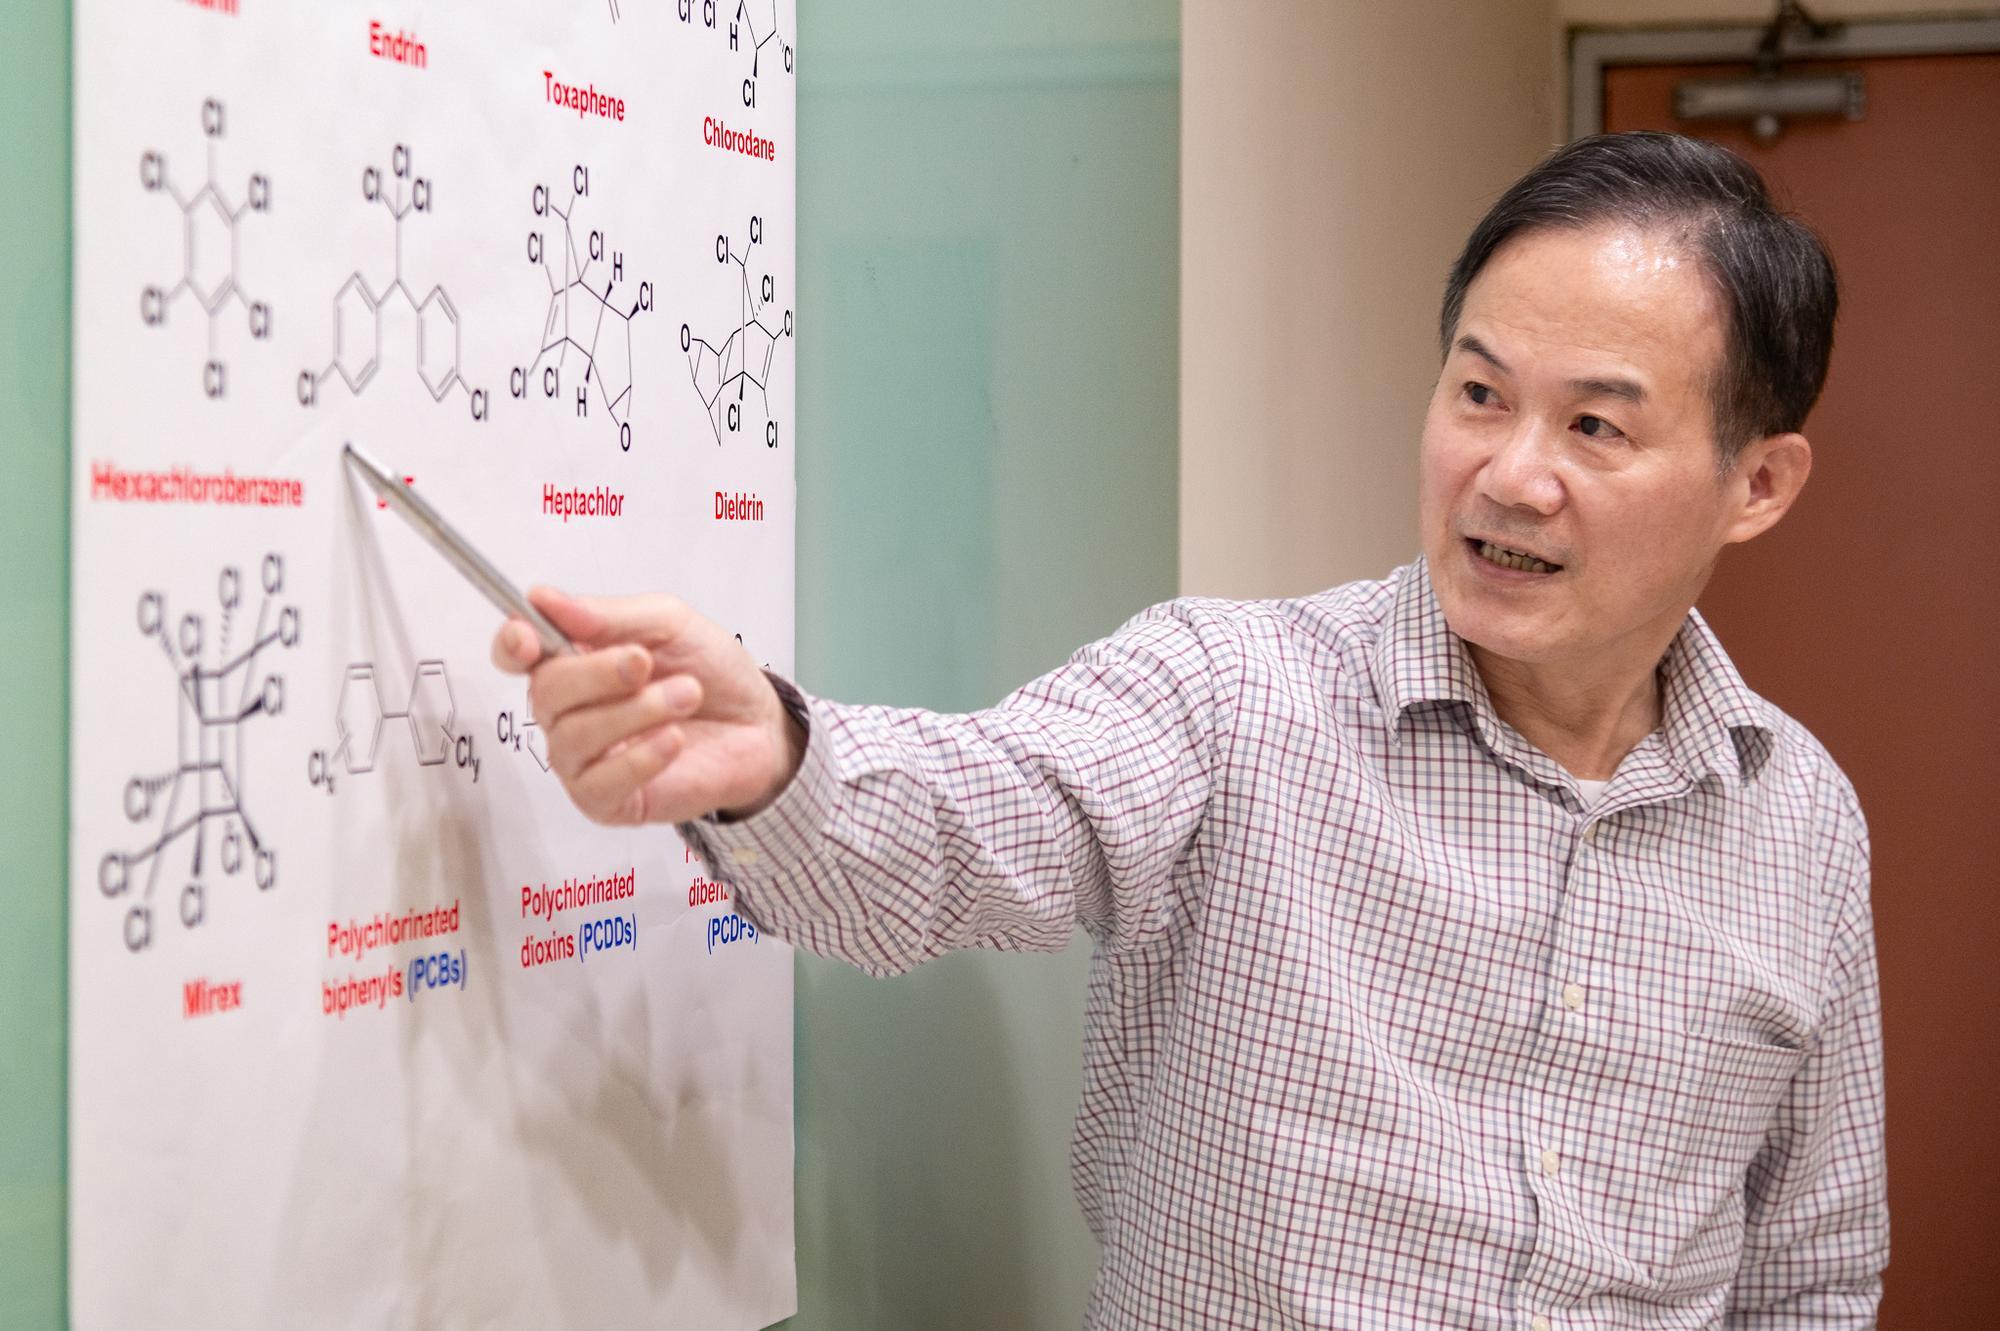 Distinguished professor Kuo Chu Hwang (黃國柱) explains the chemical structure of persistent organic pollutants (POPs), which do not decompose easily.